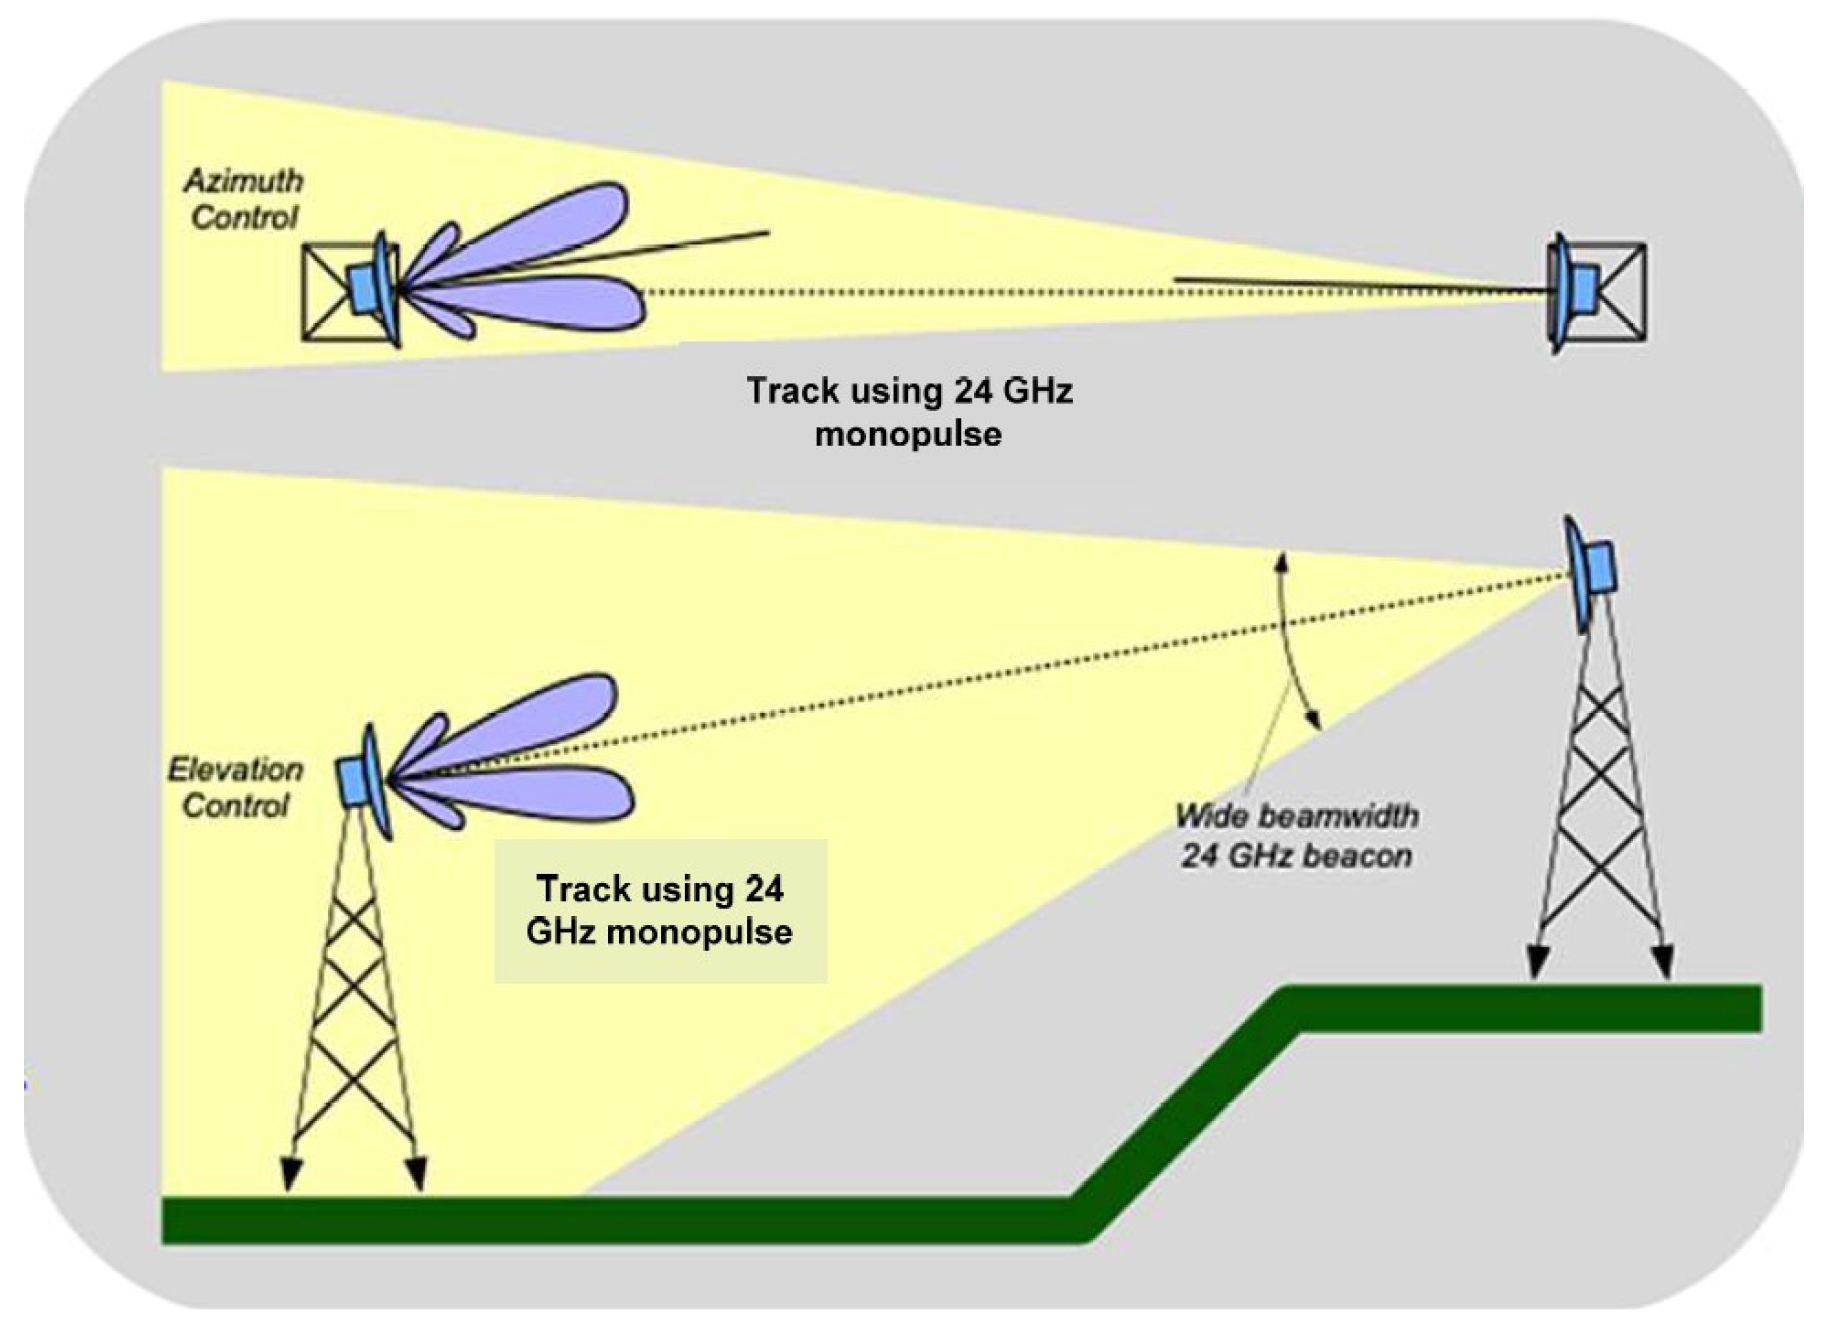  The concept of pointing using a K-band beacon transmitter at the remote end for monopulse detection at the near end, to steer the near end antenna back to boresight.